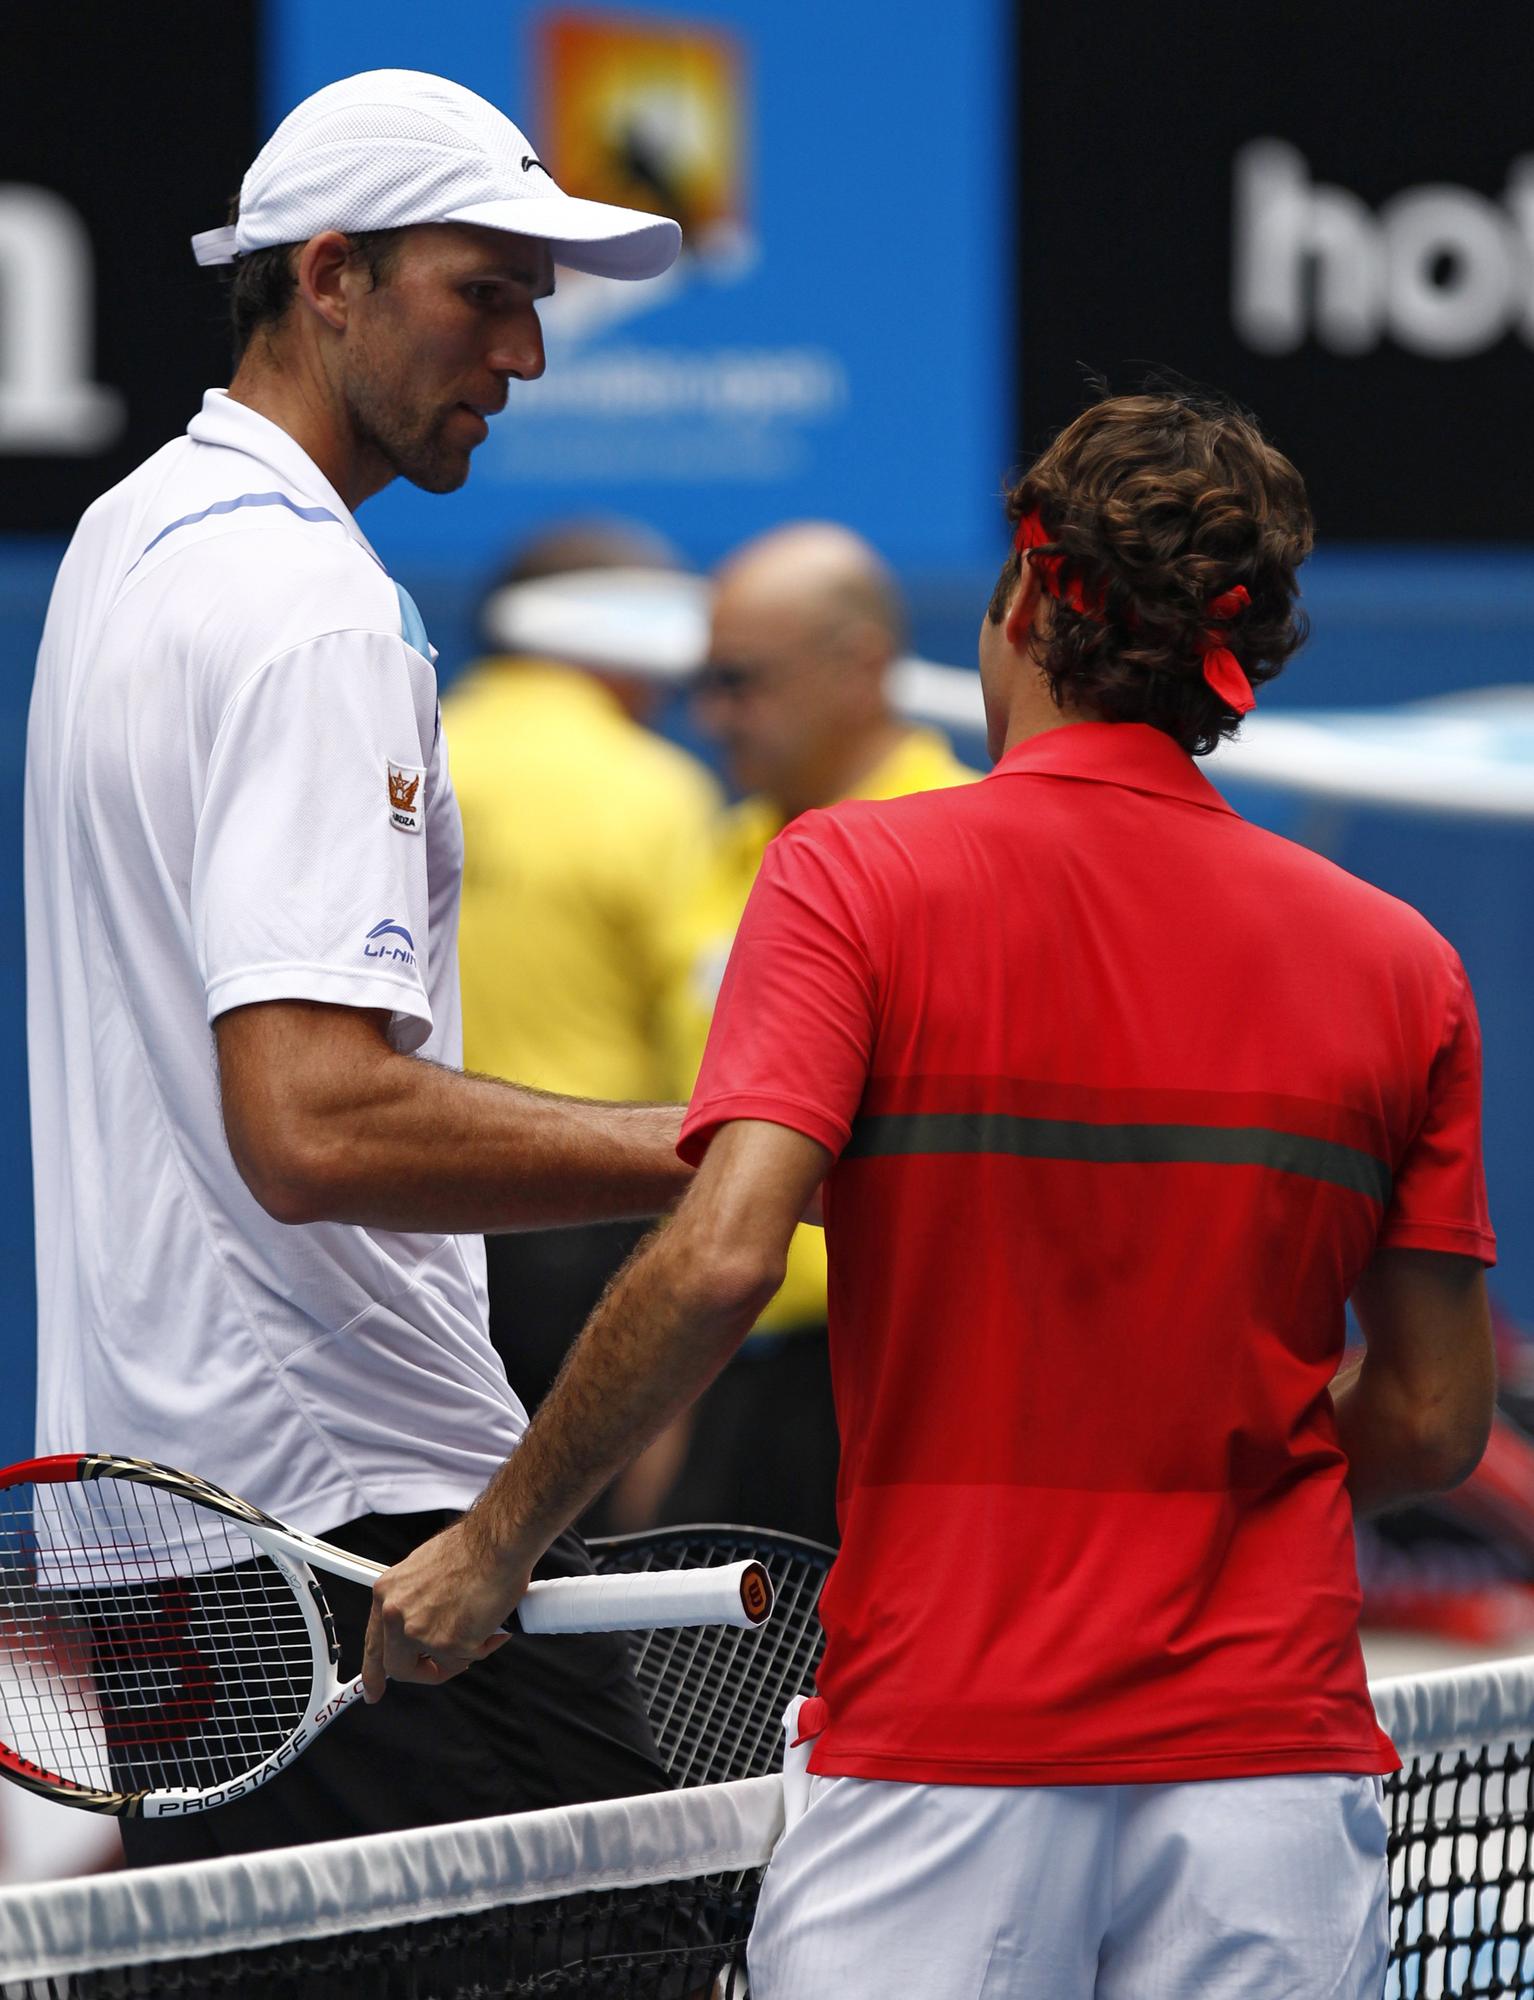 Roger Federer of Switzerland shakes hands with Ivo Karlovic of Croatia (L) after their men's singles match at the Australian Open tennis tournament in Melbourne January 20, 2012. REUTERS/Mark Blinch (AUSTRALIA - Tags: SPORT TENNIS) [REUTERS - Blinch]